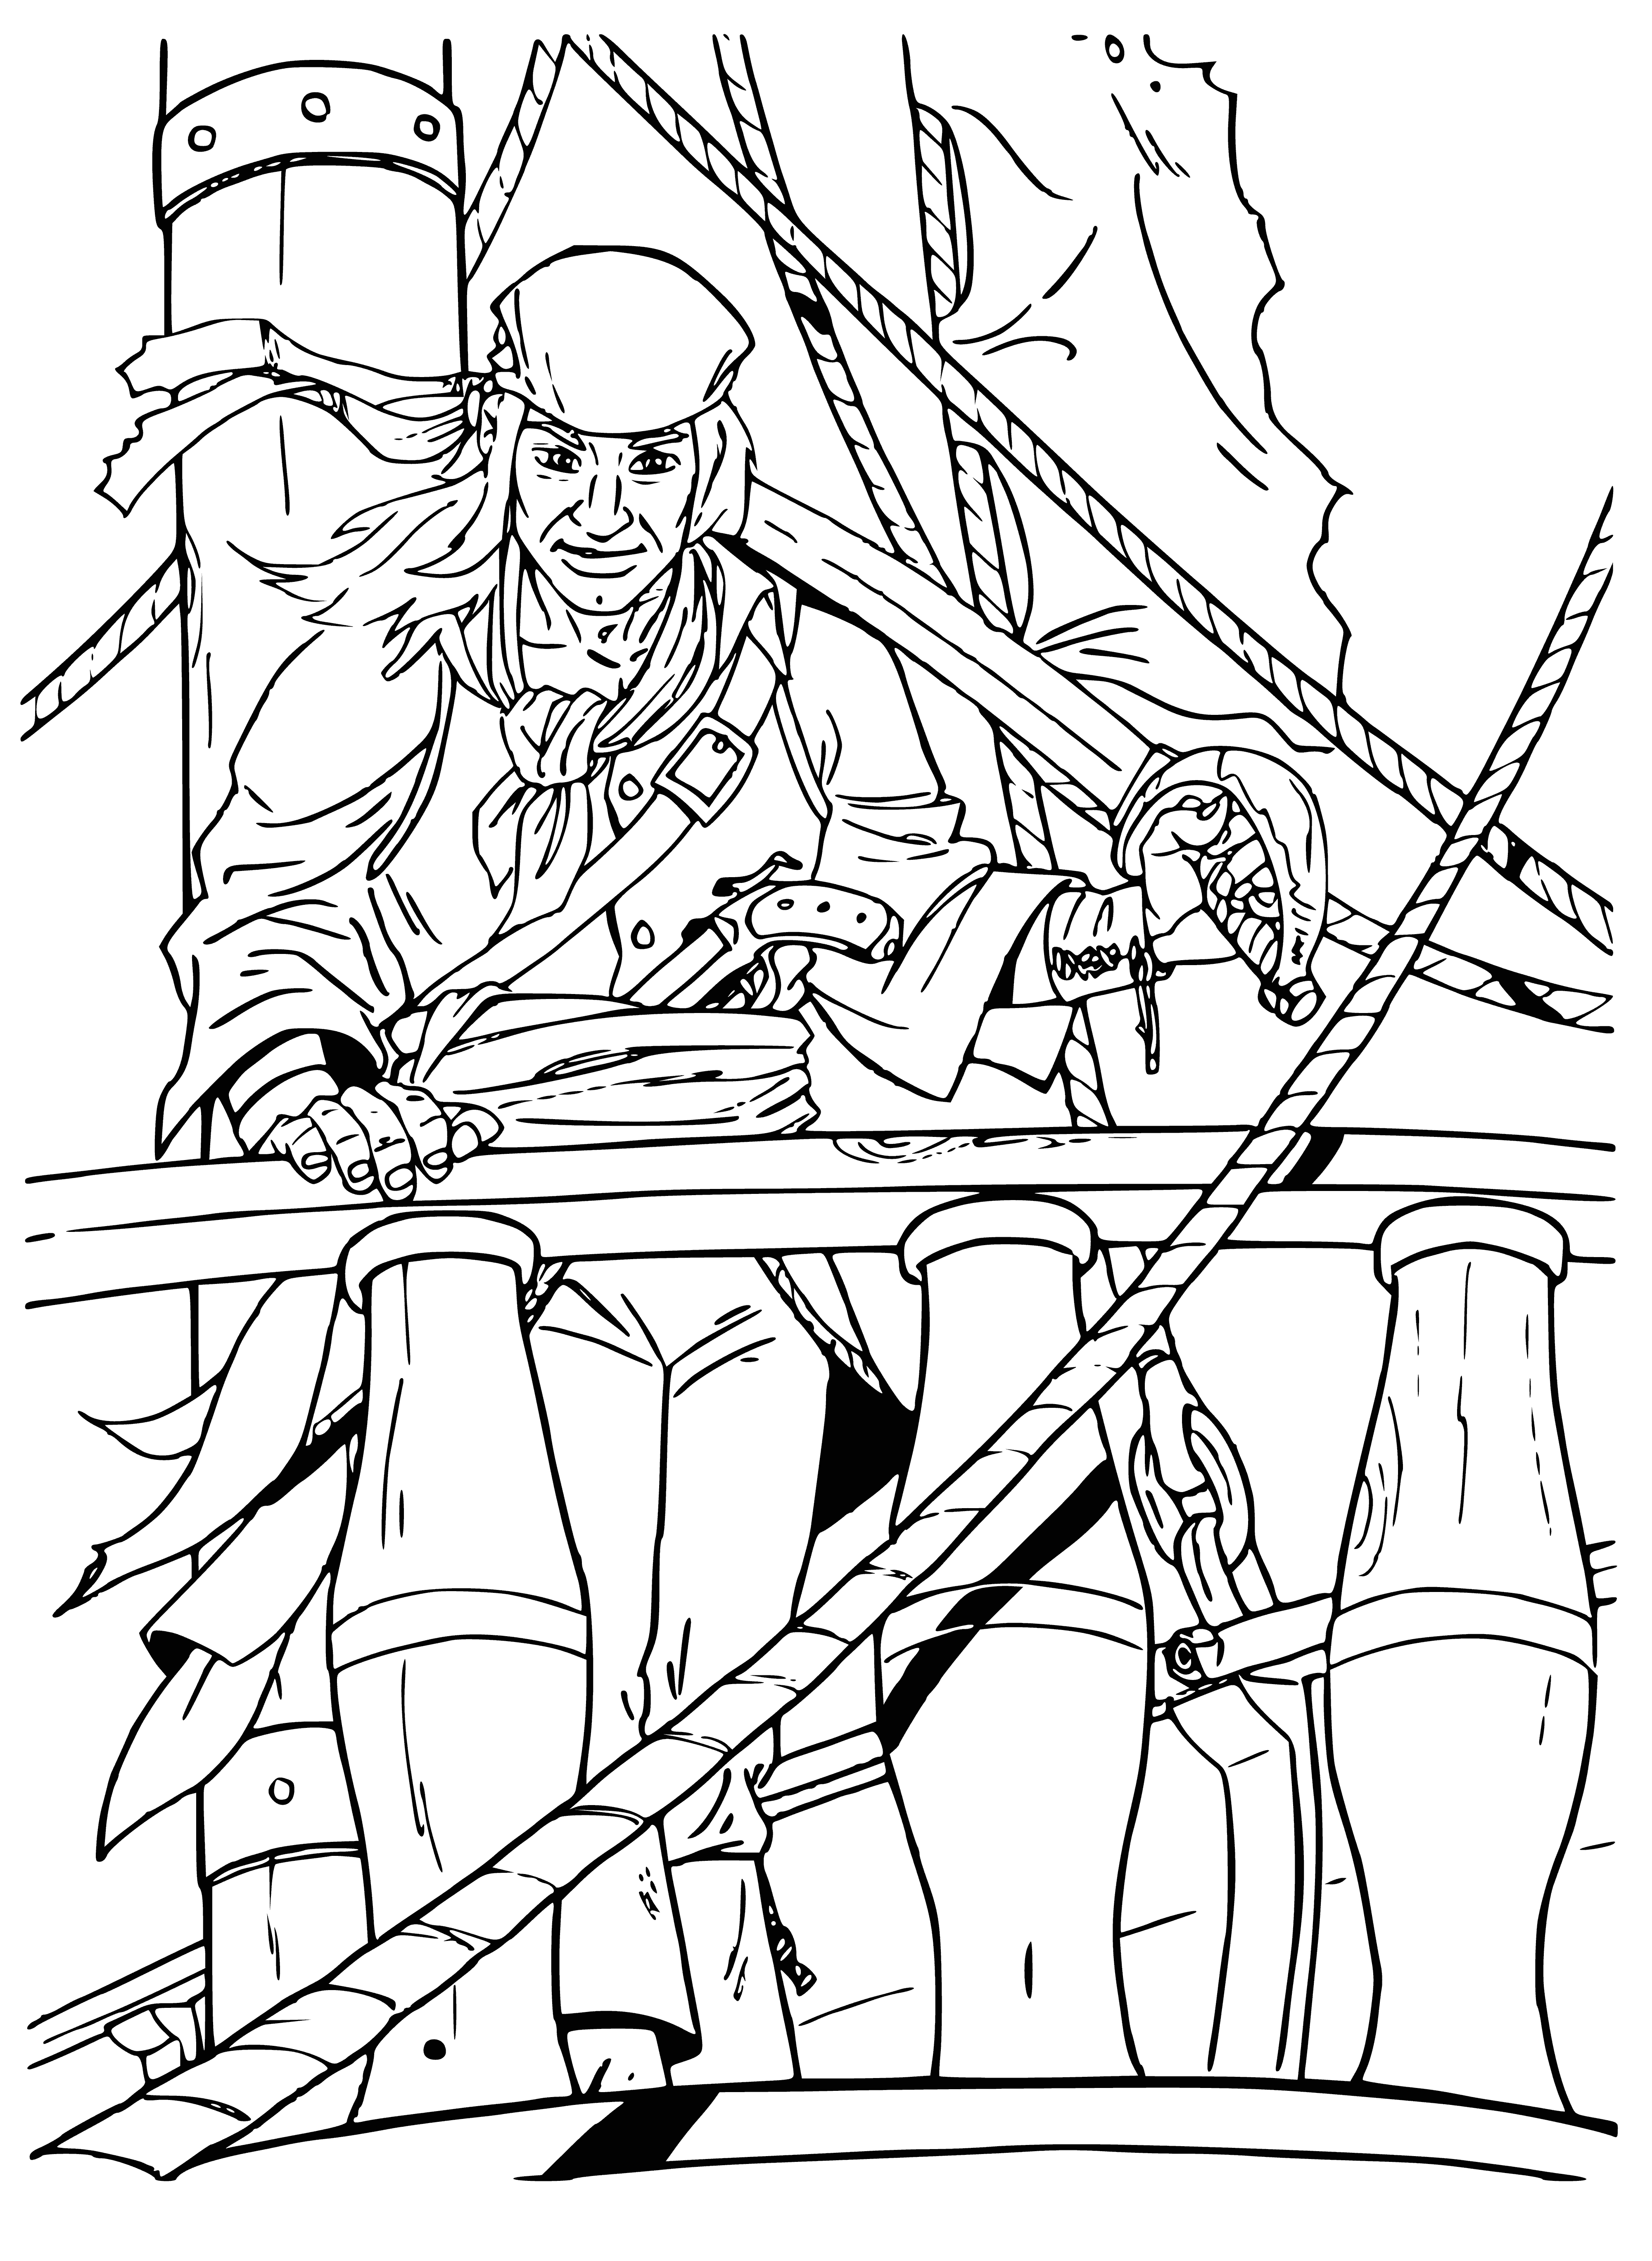 Pirate on the ship coloring page